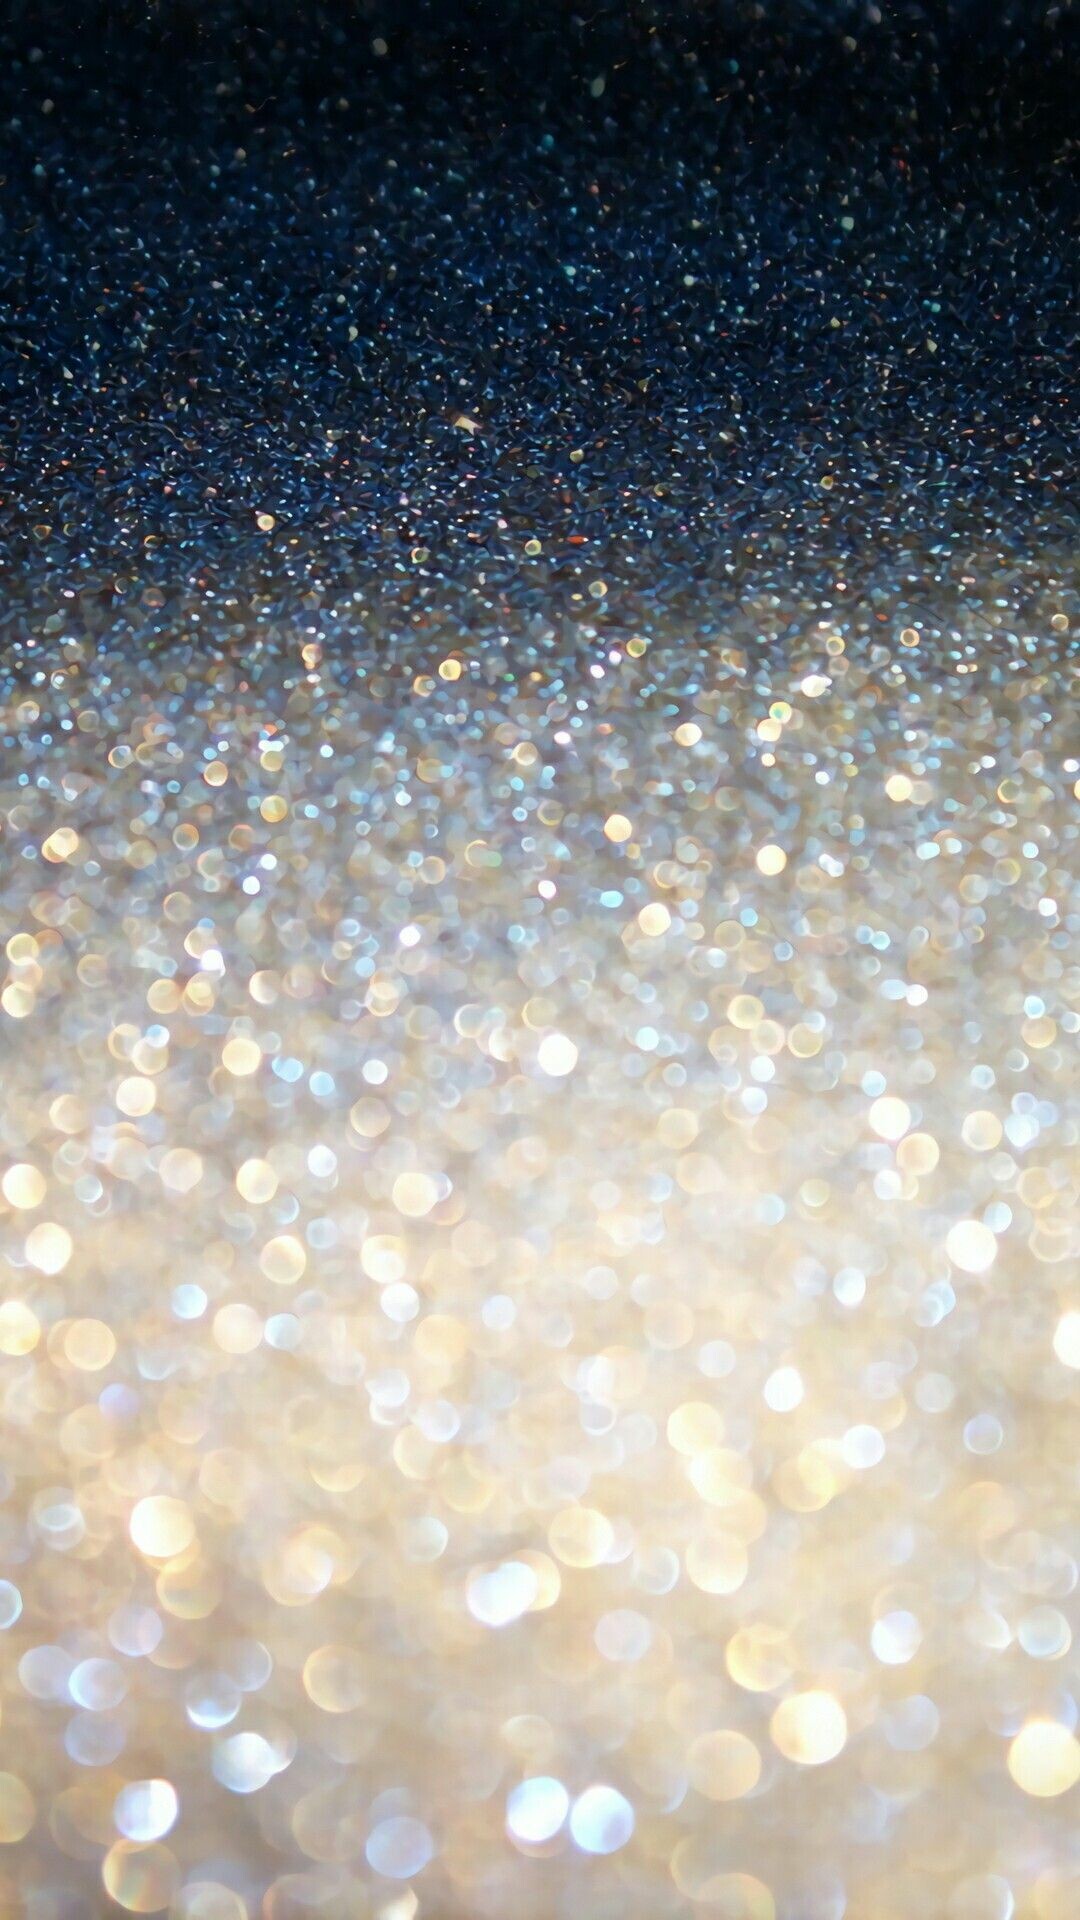 Sparkle iPhone, Dazzling display, Captivating shimmer, Eye-catching backdrop, 1080x1920 Full HD Phone